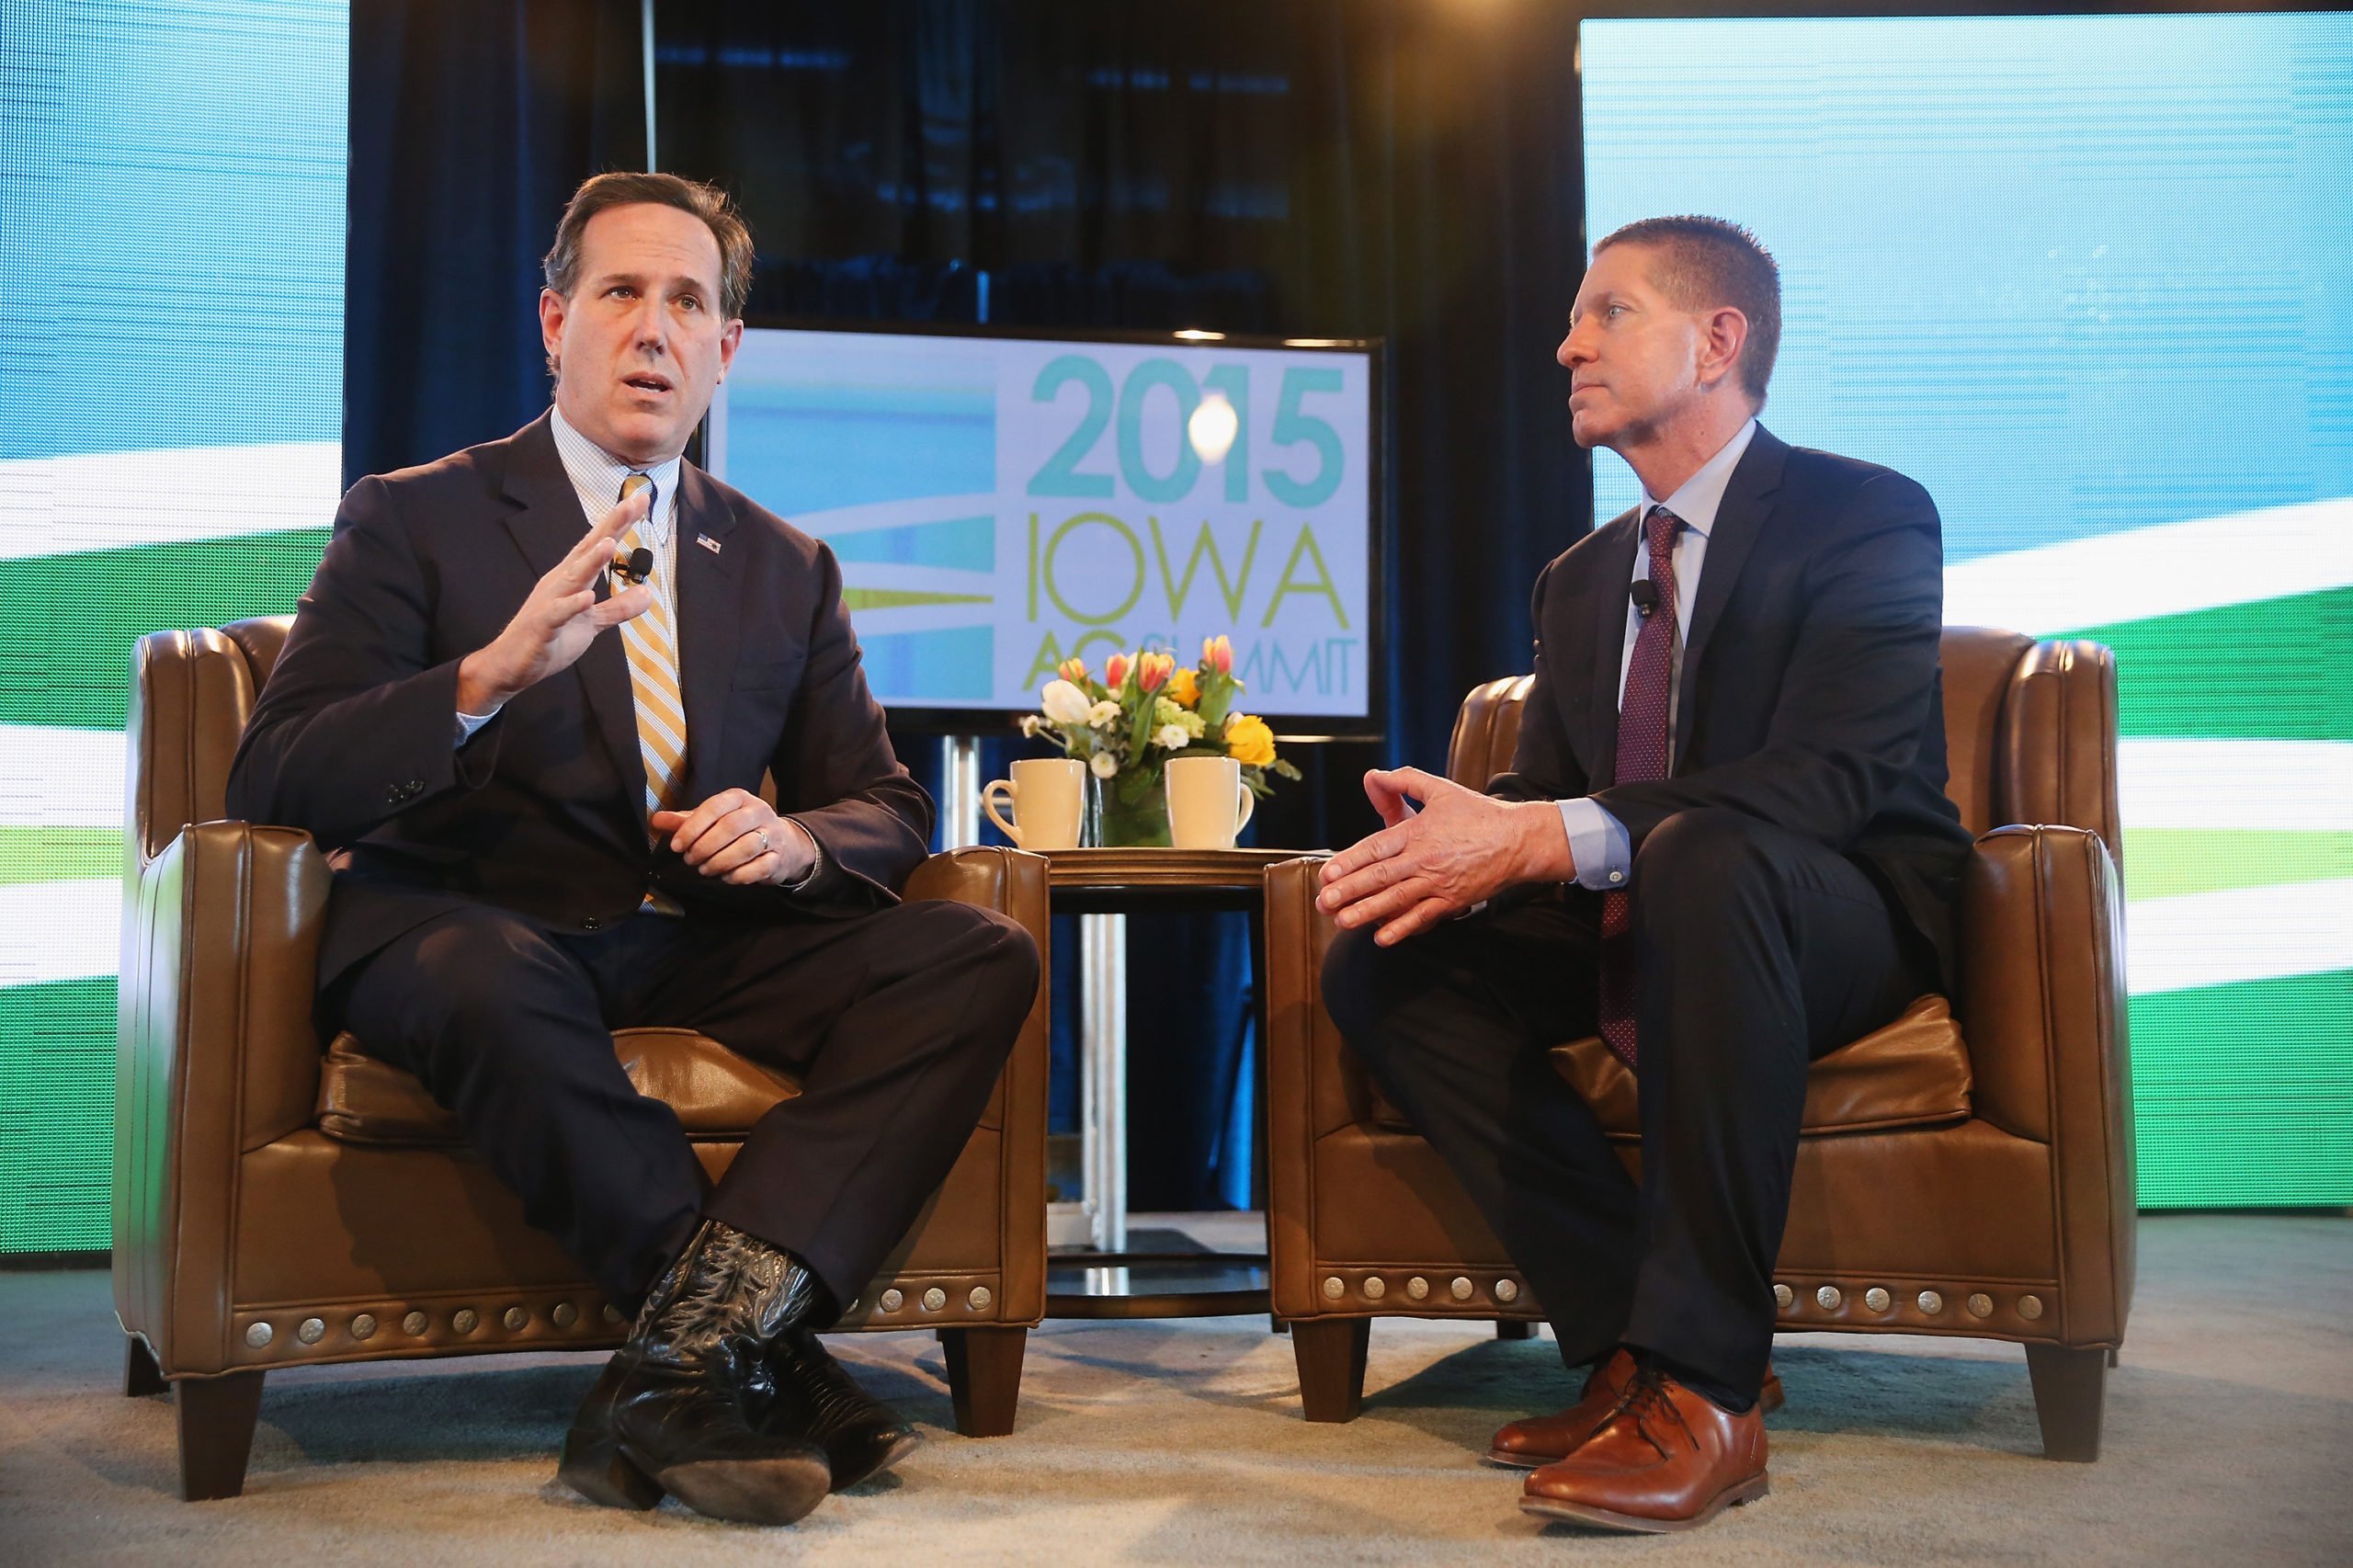 DES MOINES, IA - MARCH 07: Former Pennsylvania Senator Rick Santorum (L) fields questions from Bruce Rastetter at the Iowa Ag Summit on March 7, 2015 in Des Moines, Iowa. The event allowed the invited speakers, many of whom were potential 2016 Republican presidential hopefuls, to outline their views on agricultural issue. (Photo by Scott Olson/Getty Images)